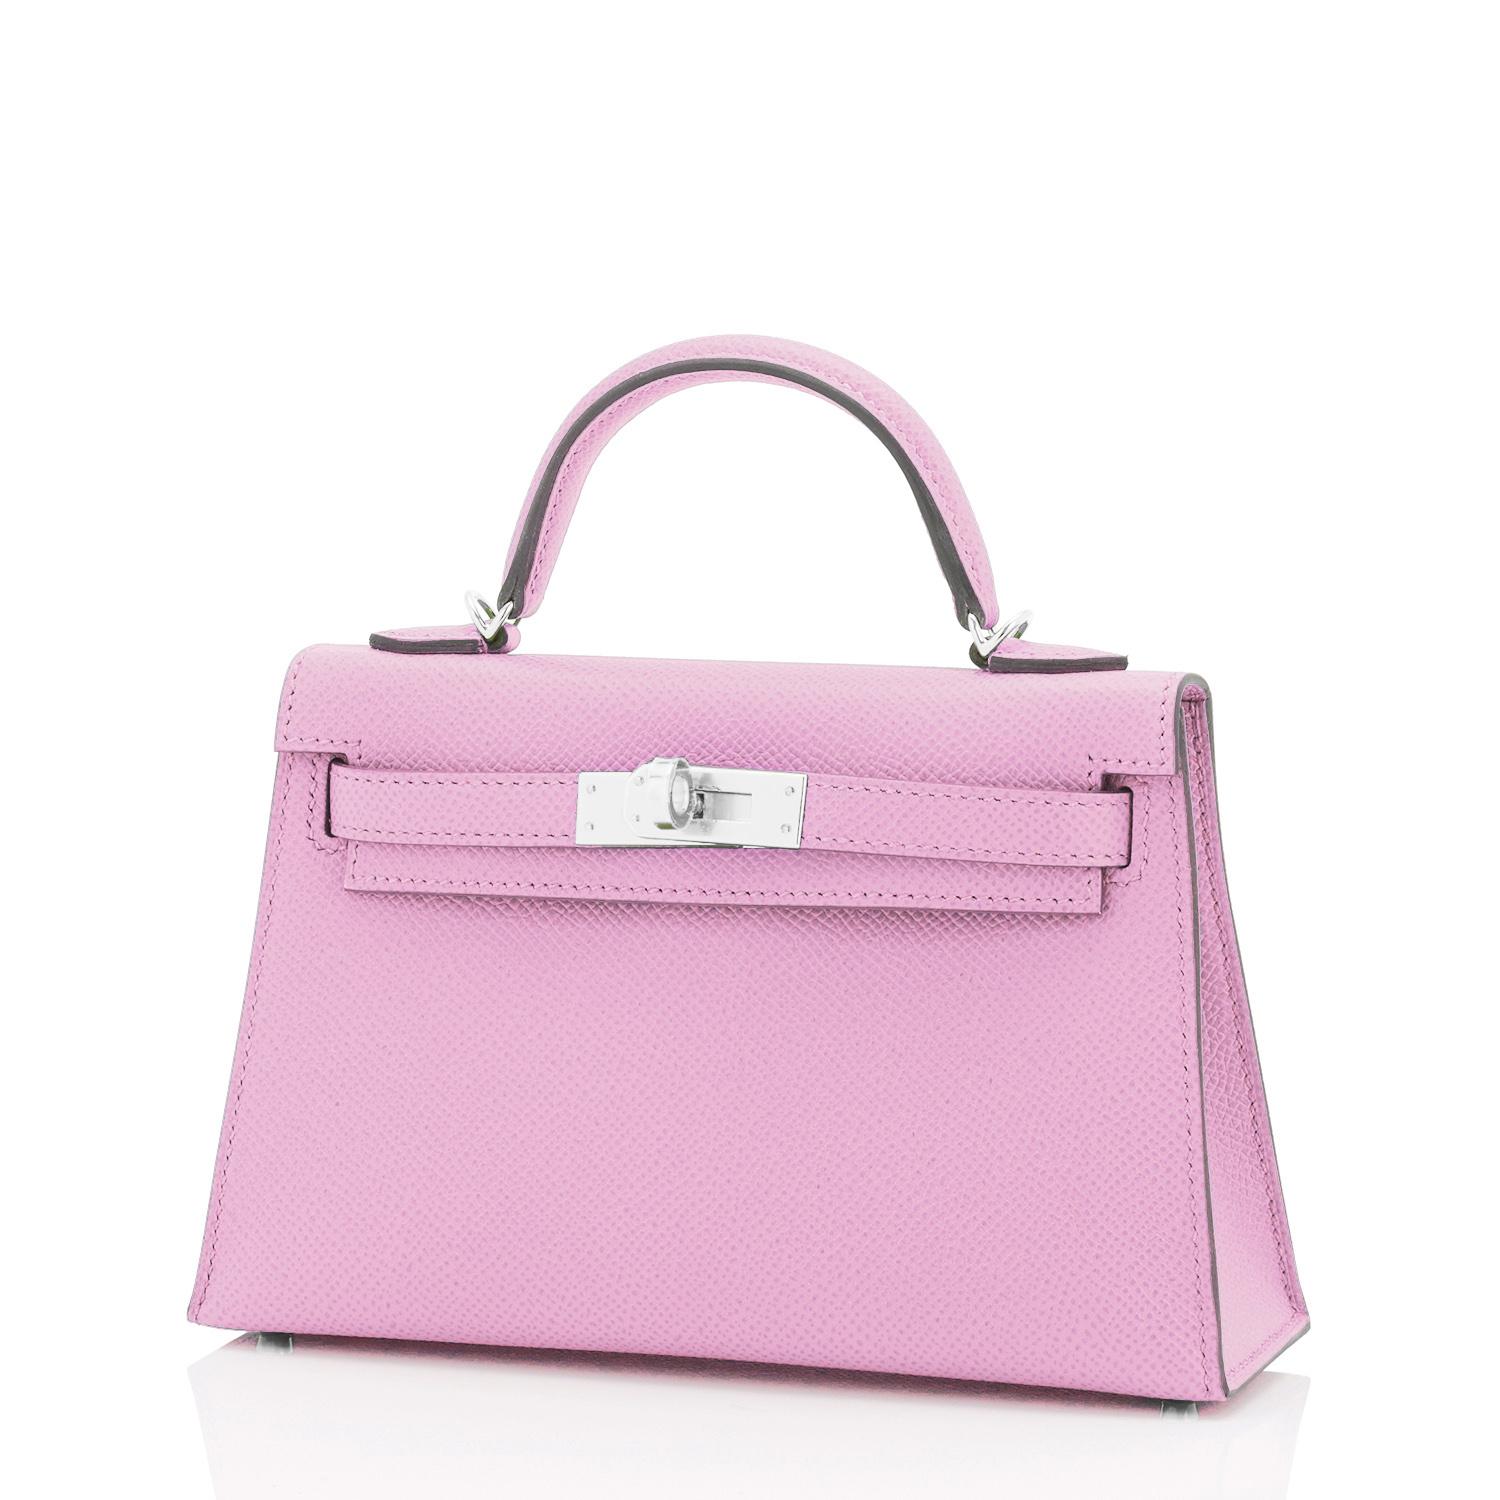 Chicjoy is pleased to present this stunning Hermes Mini Kelly 20cm in Mauve VIP Epsom Shoulder Bag, U Stamp, 2022
Just purchased from Hermes store; bag bears new 2022 U Stamp.
Brand New in Box.  Store Fresh. Pristine Condition (with plastic on